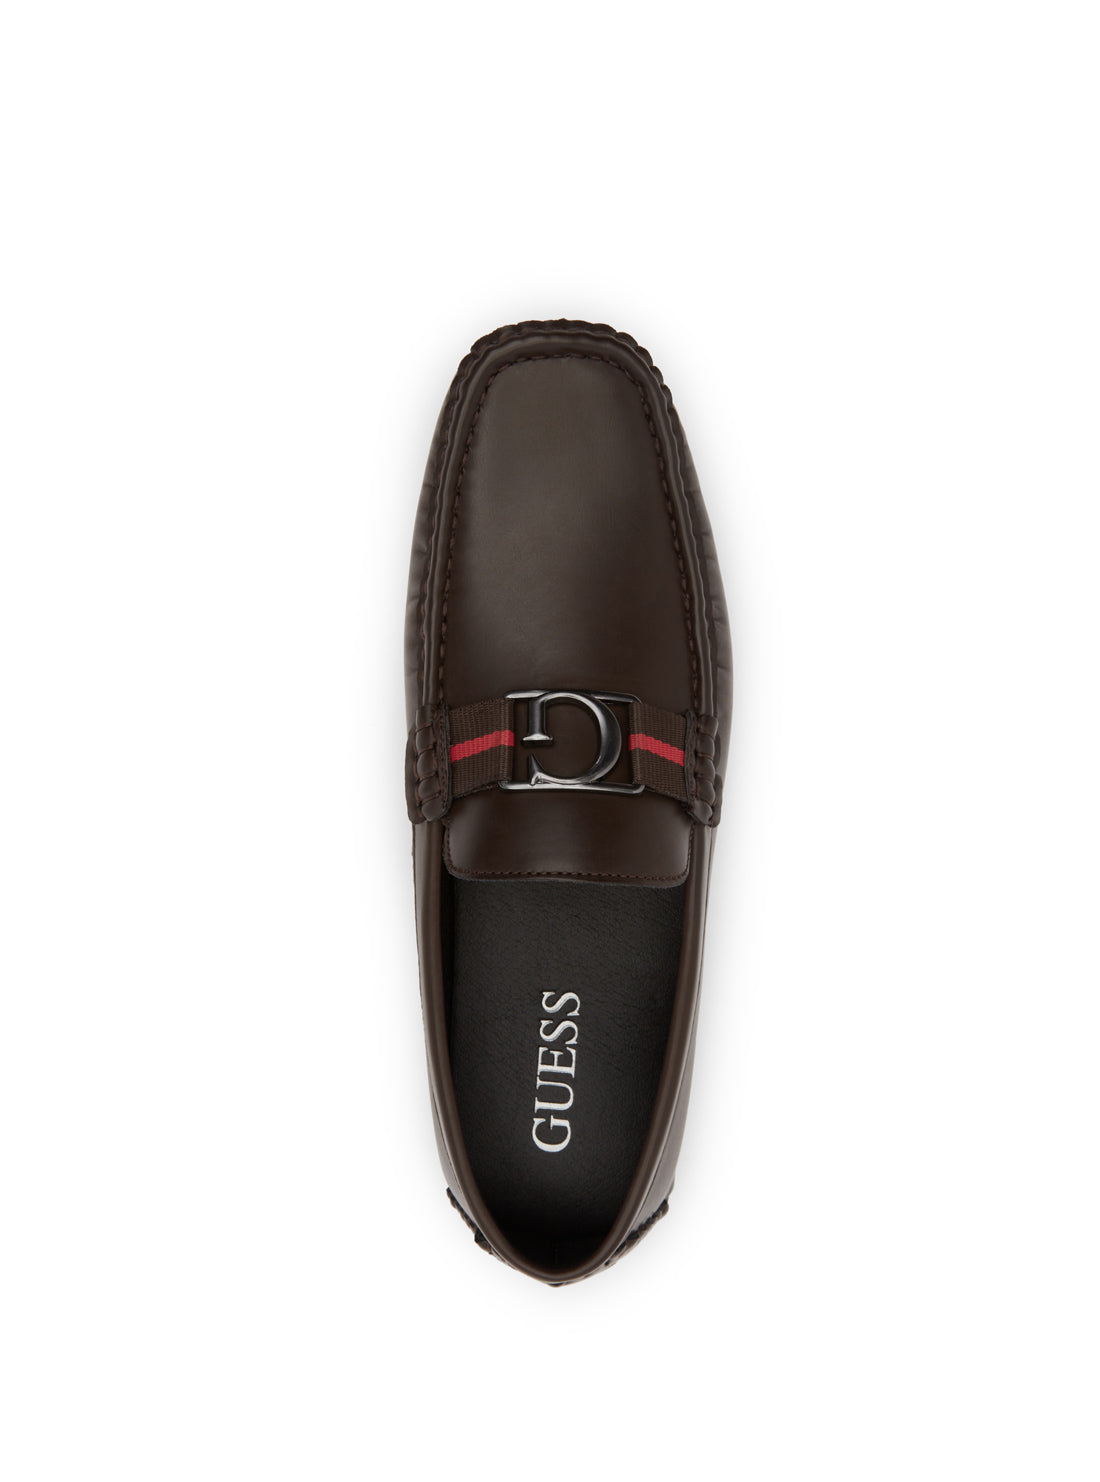 GUESS Men's Brown Askers Loafers ASKERS Top View